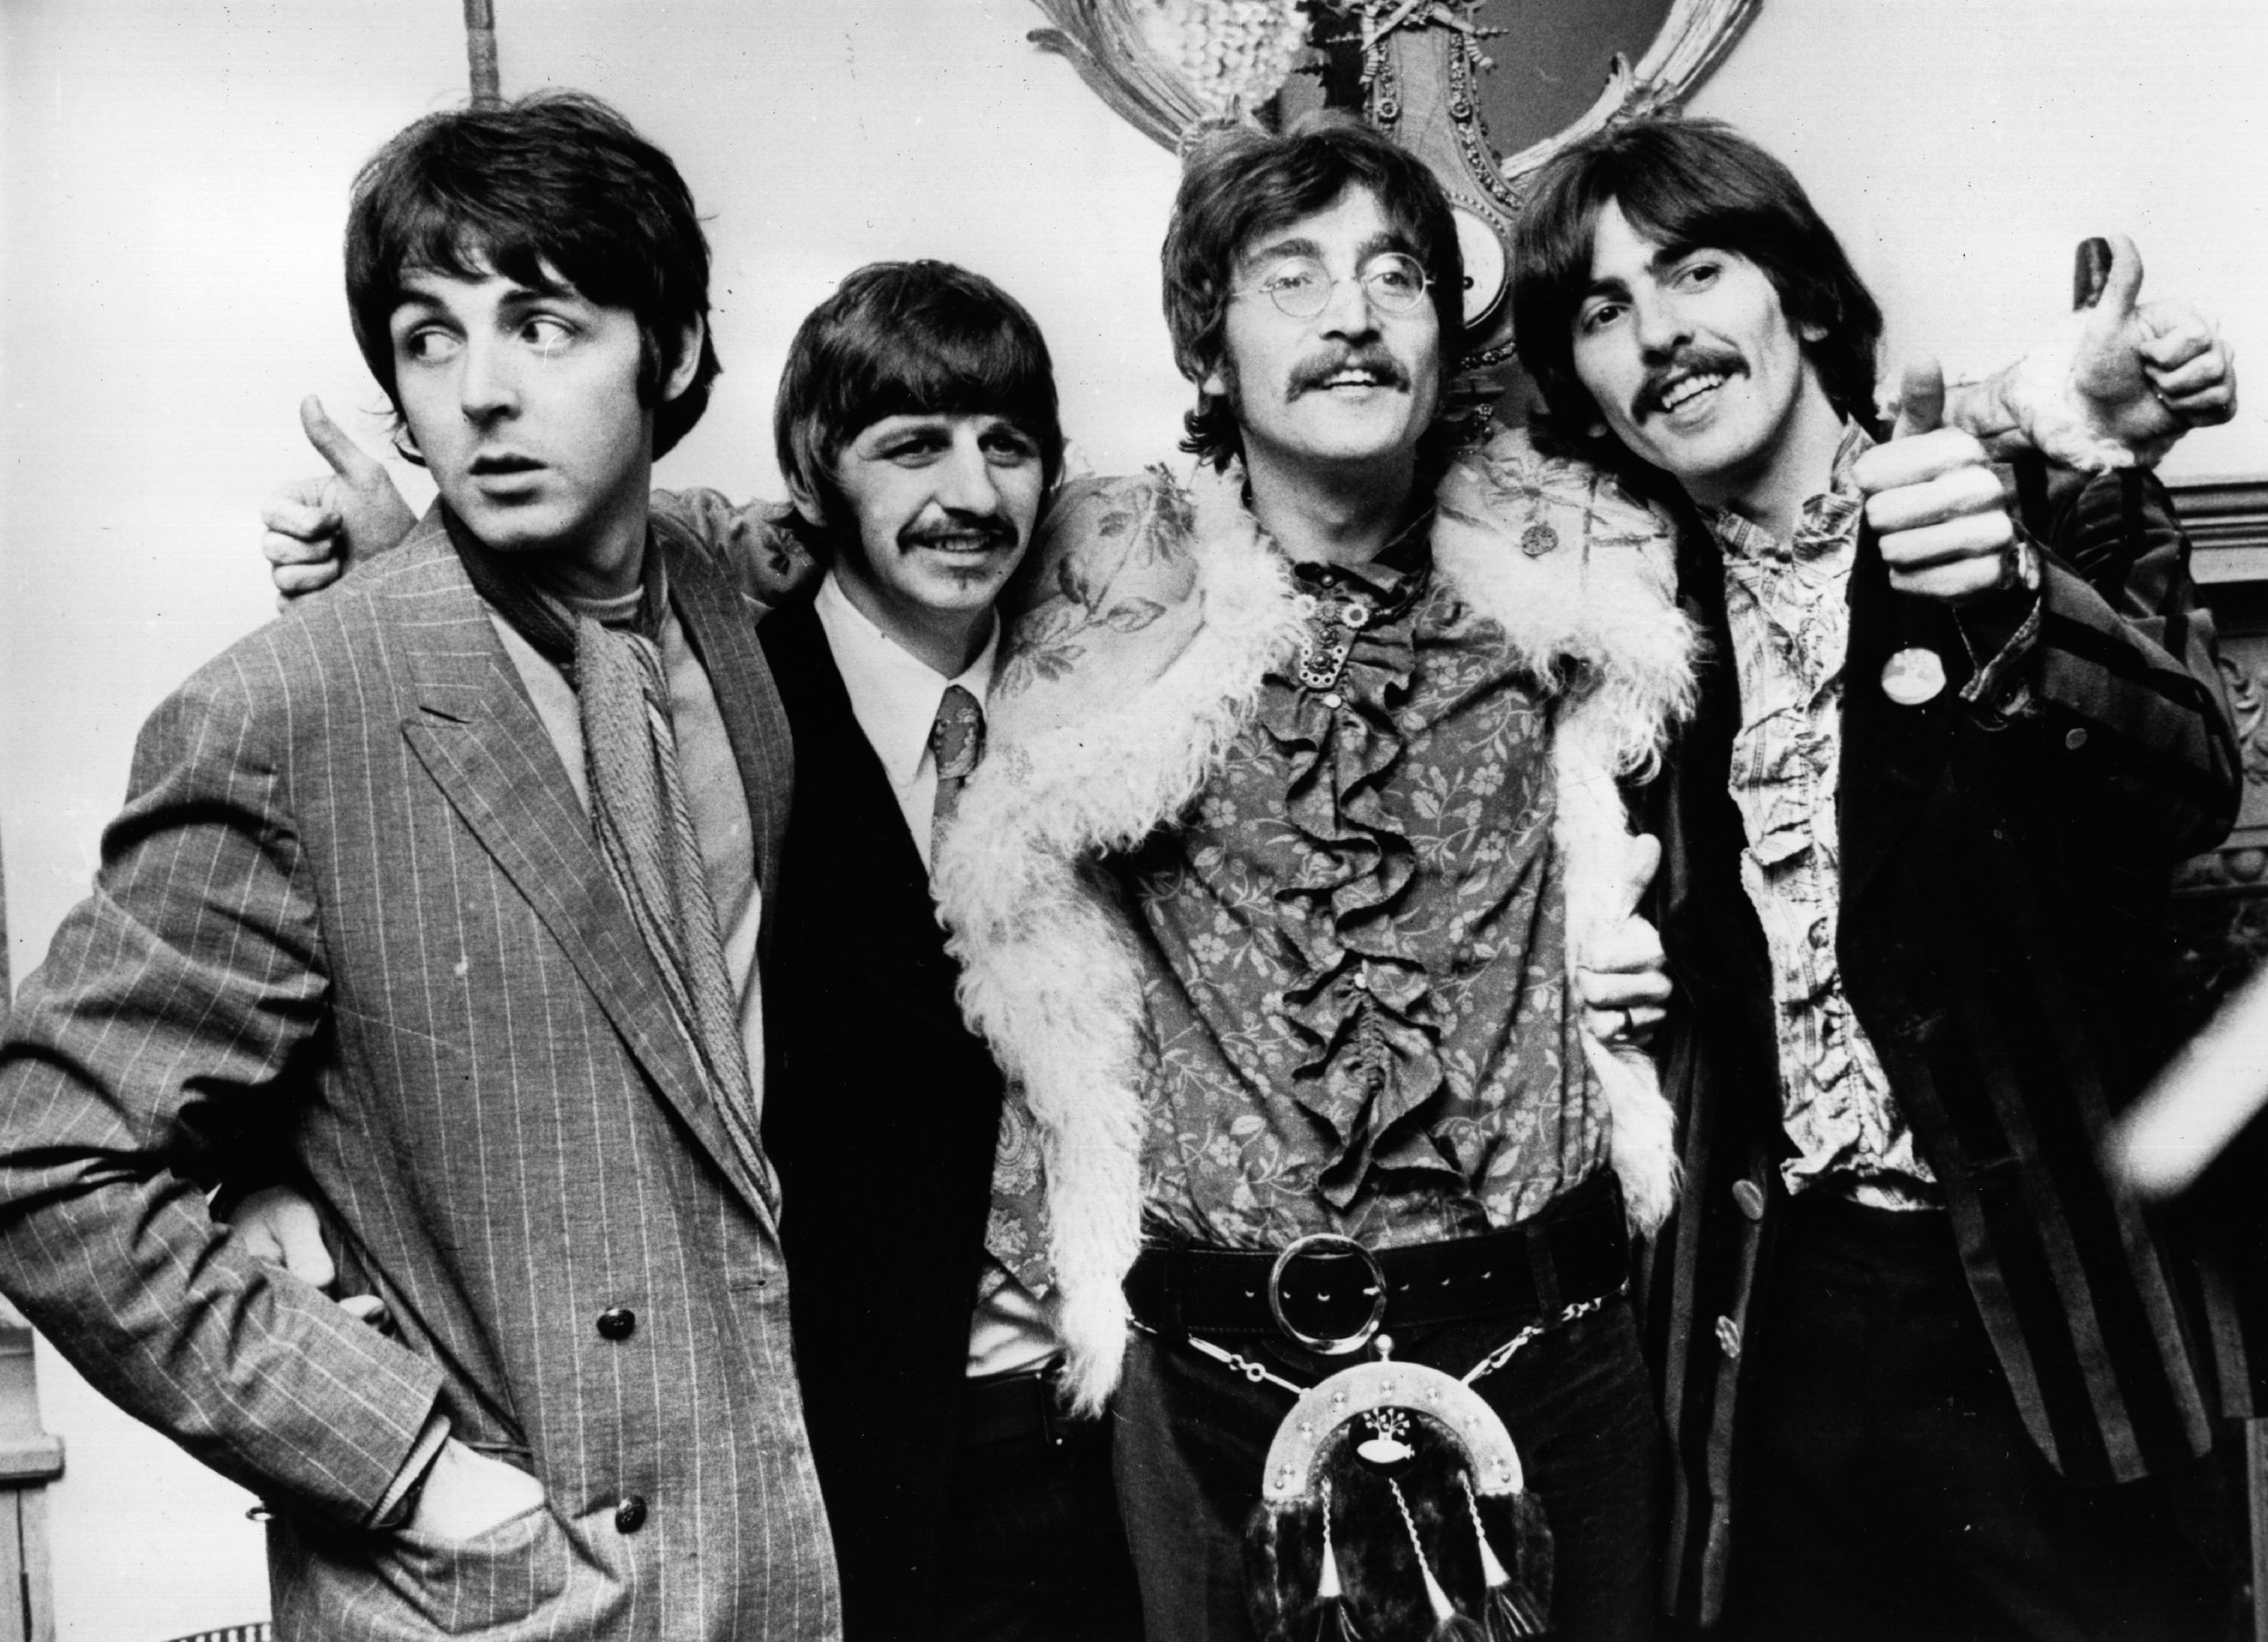 "Lucy in the Sky with Diamonds" era Beatles in black-and-white